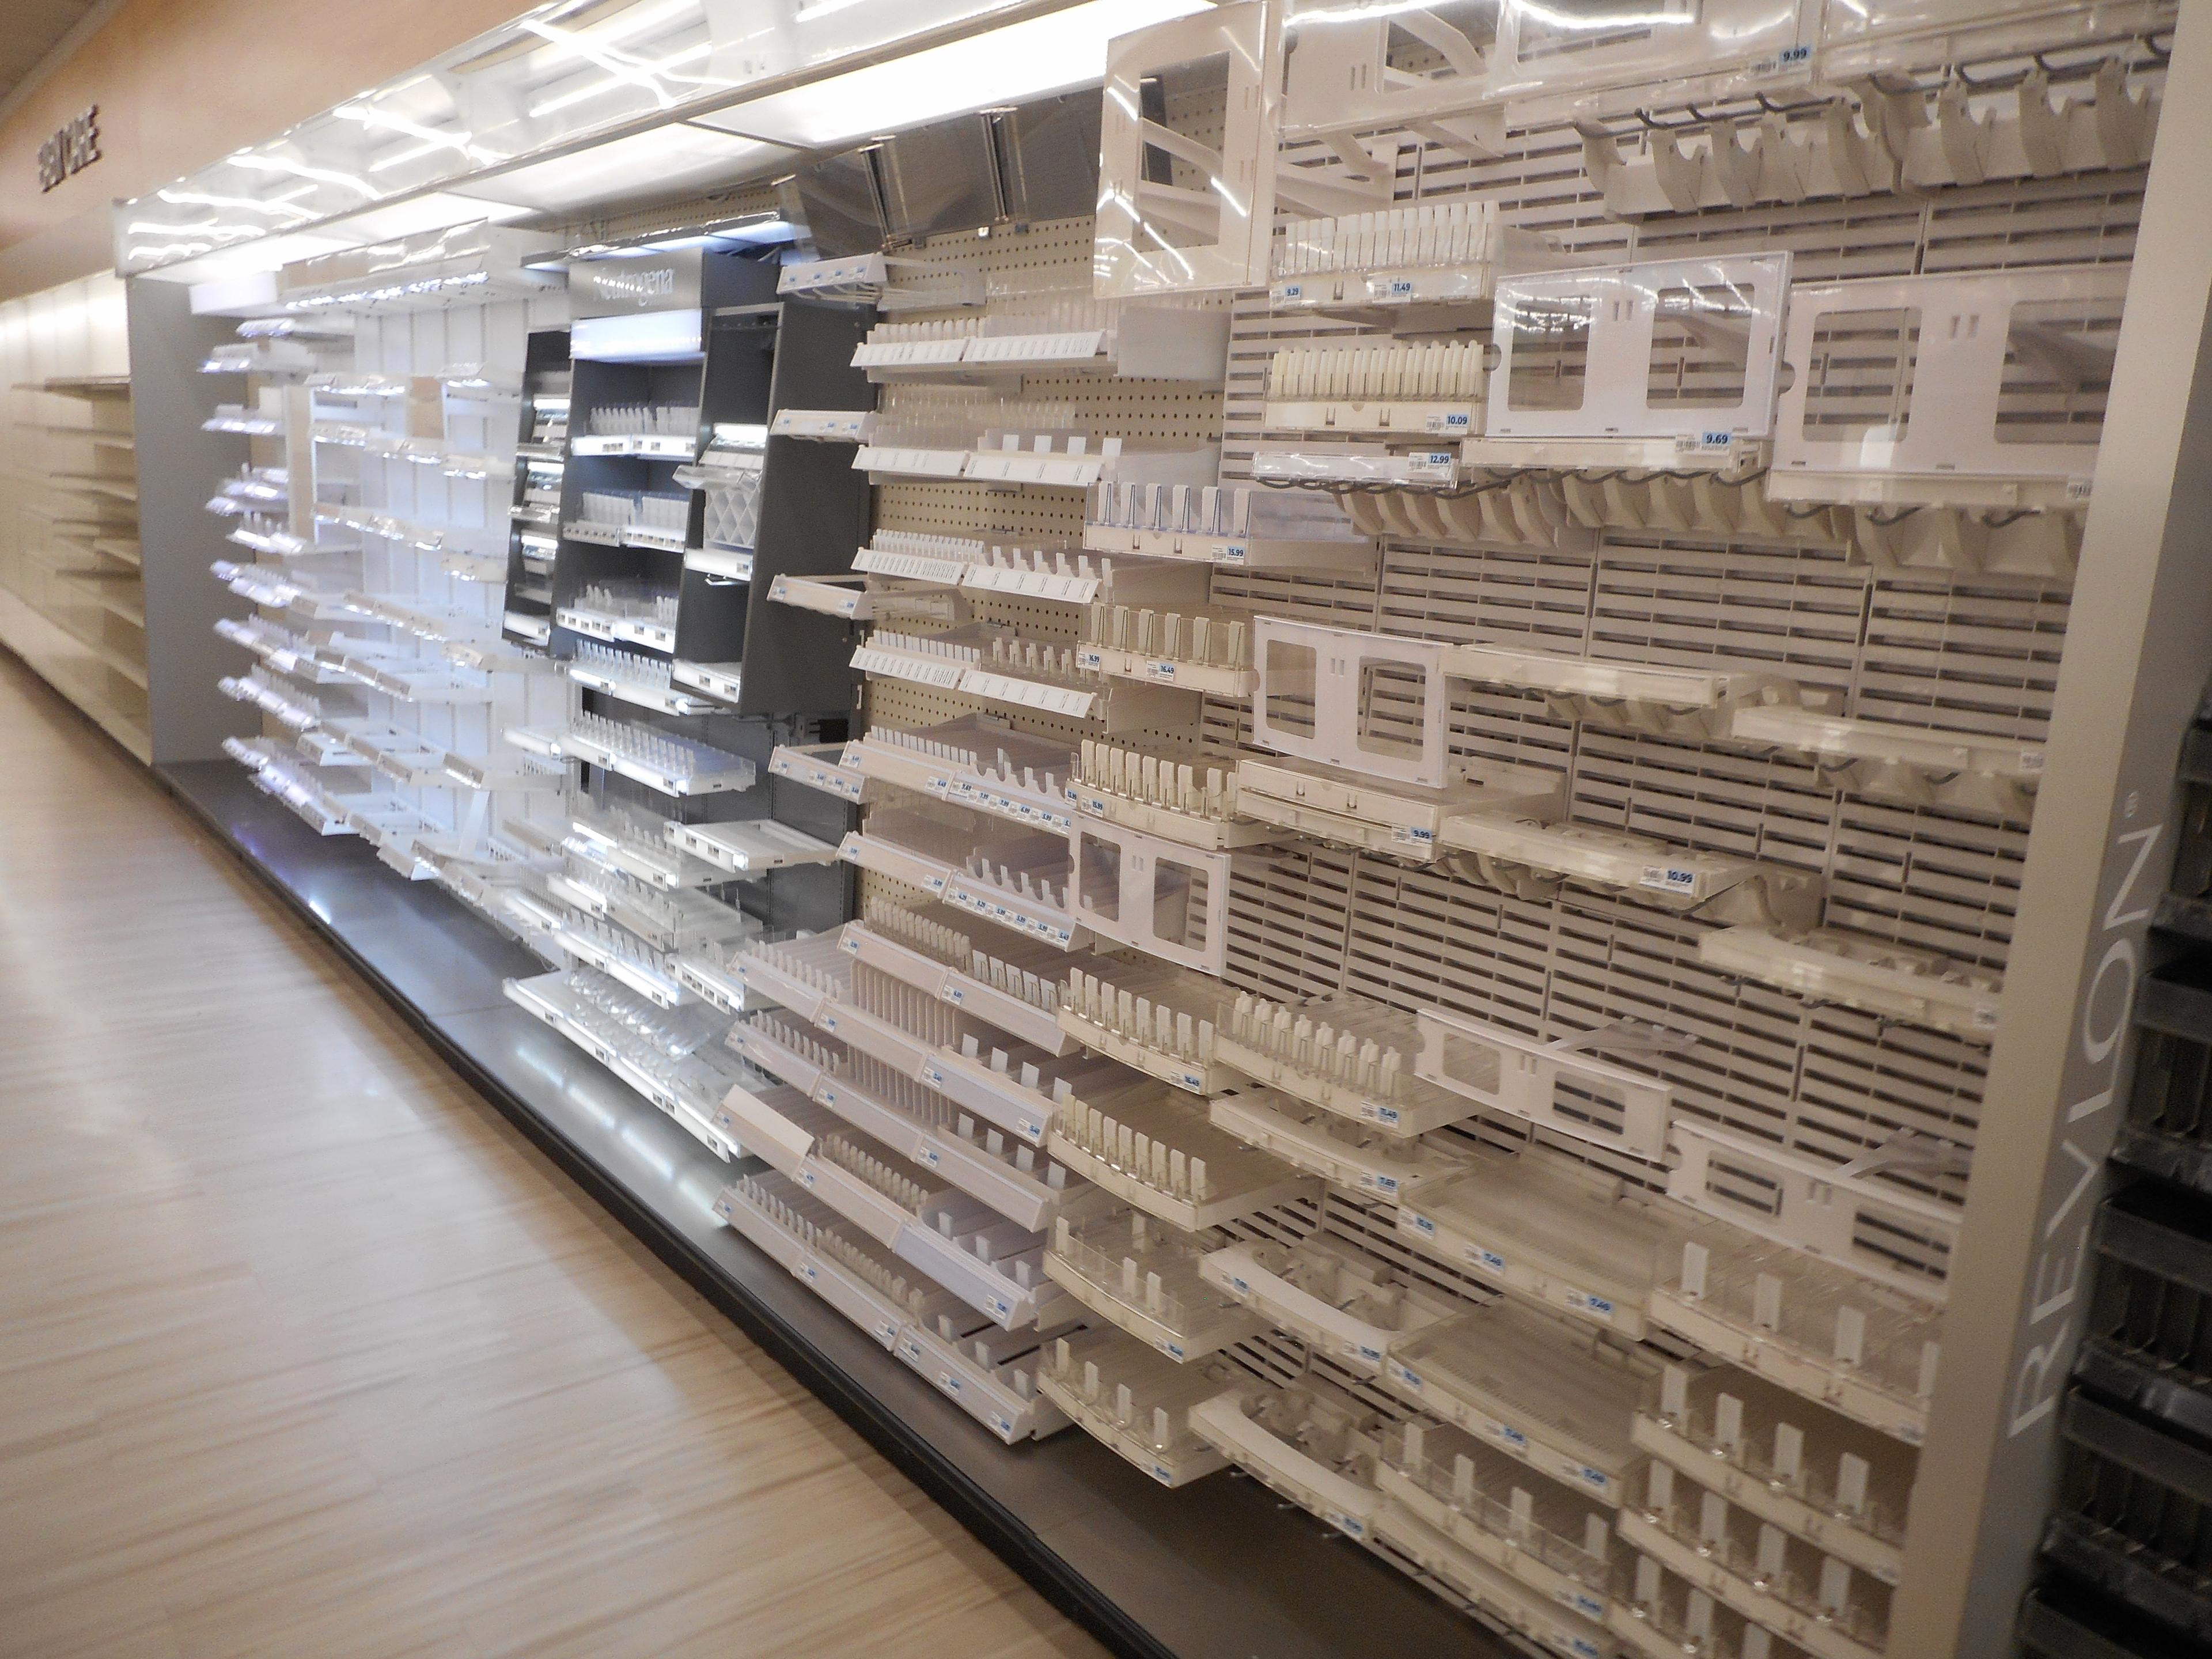 124 FT WHITE WALL SHELVING WITH COSMETICS DISPLAYS 84 INCHES TALL